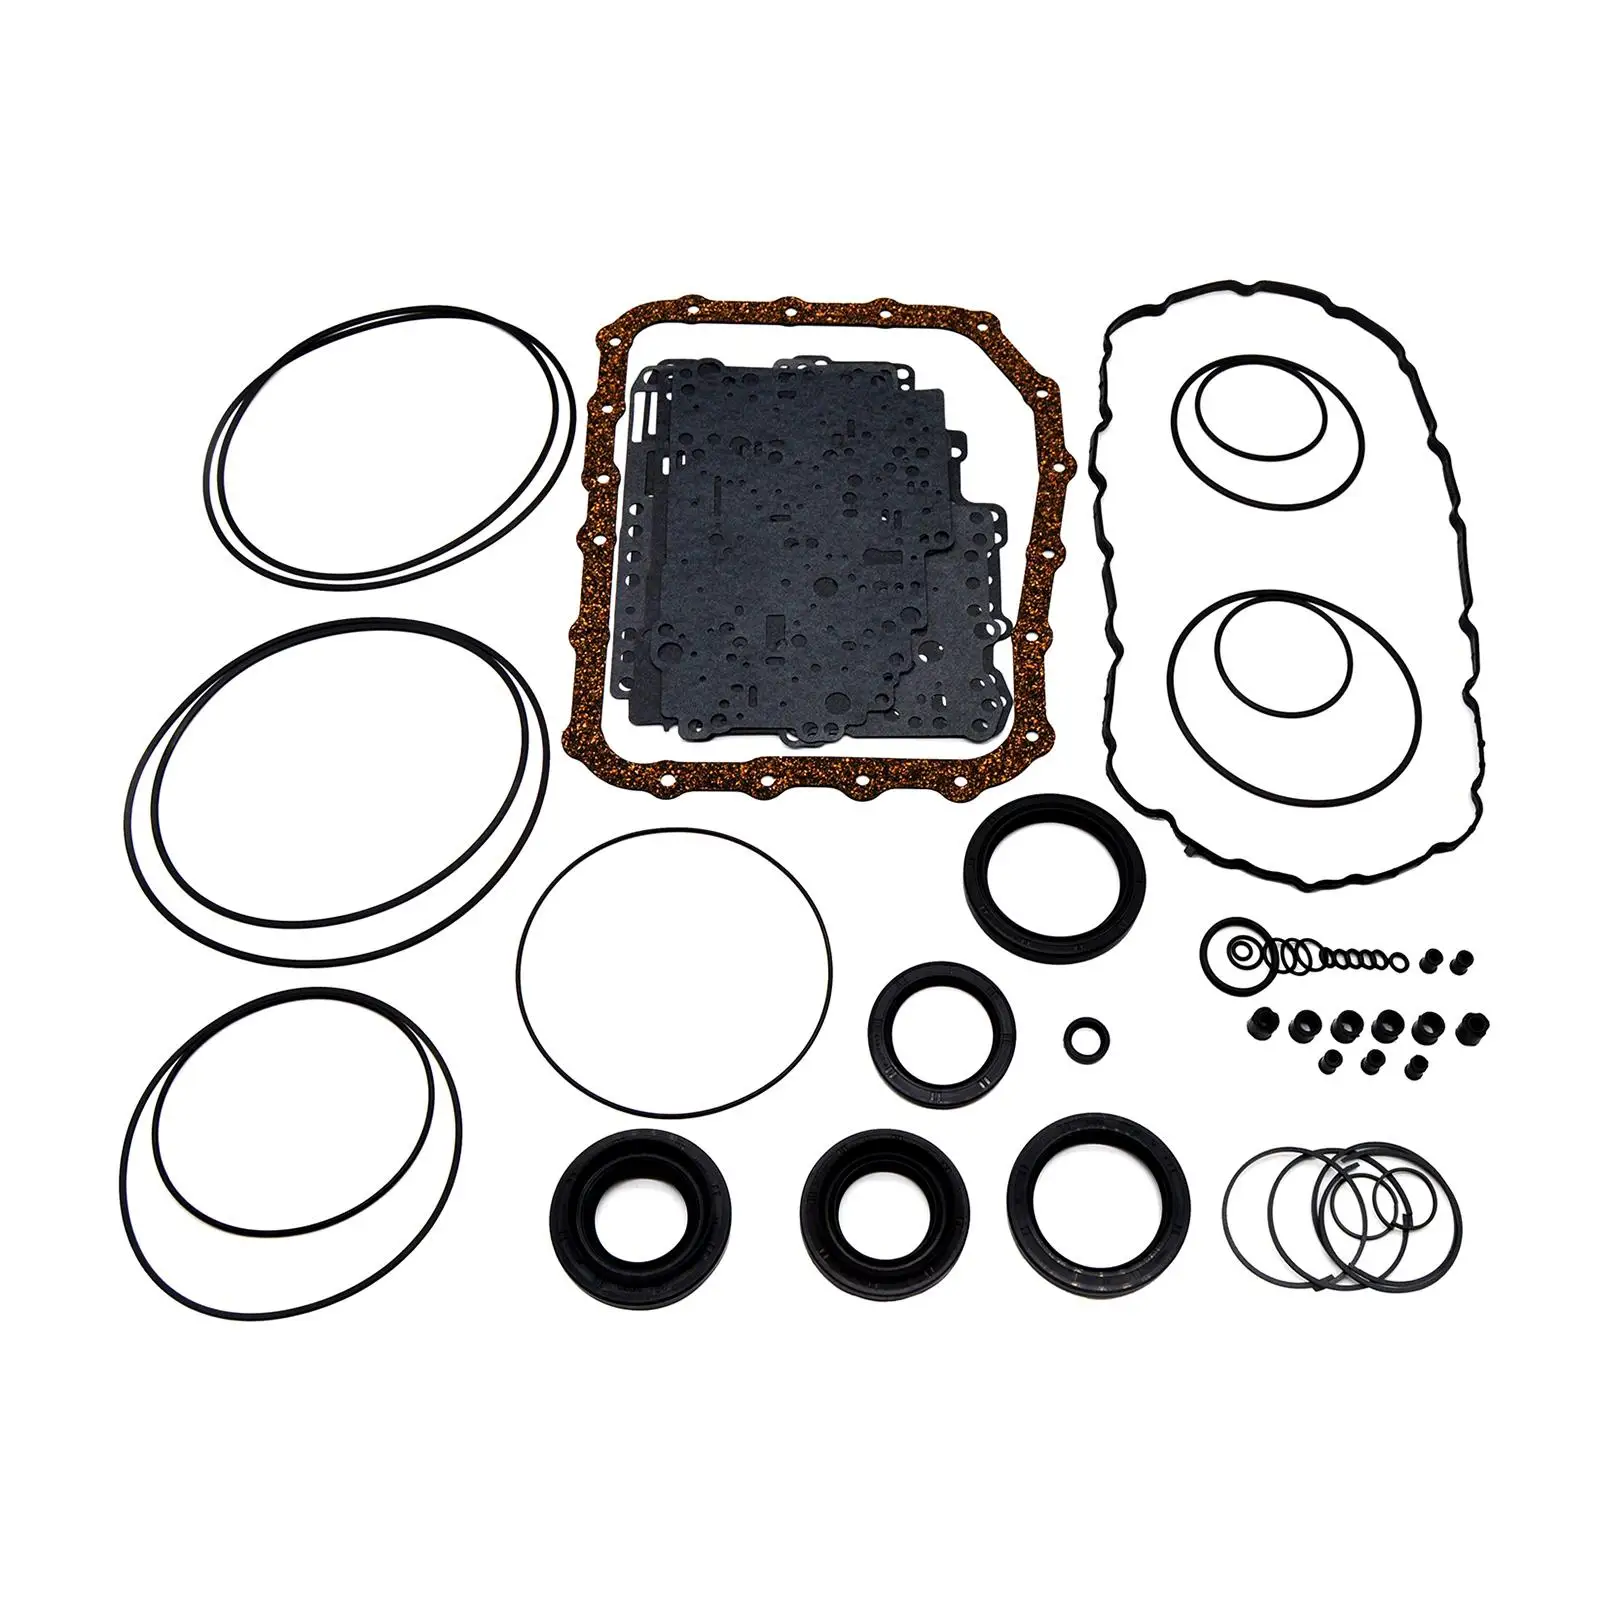 Automatic Transmission  Kit Overhaul A6LF1 A6LF2 Anti-Deforming Transmission  for  Kia 2010 up Rubber Rings